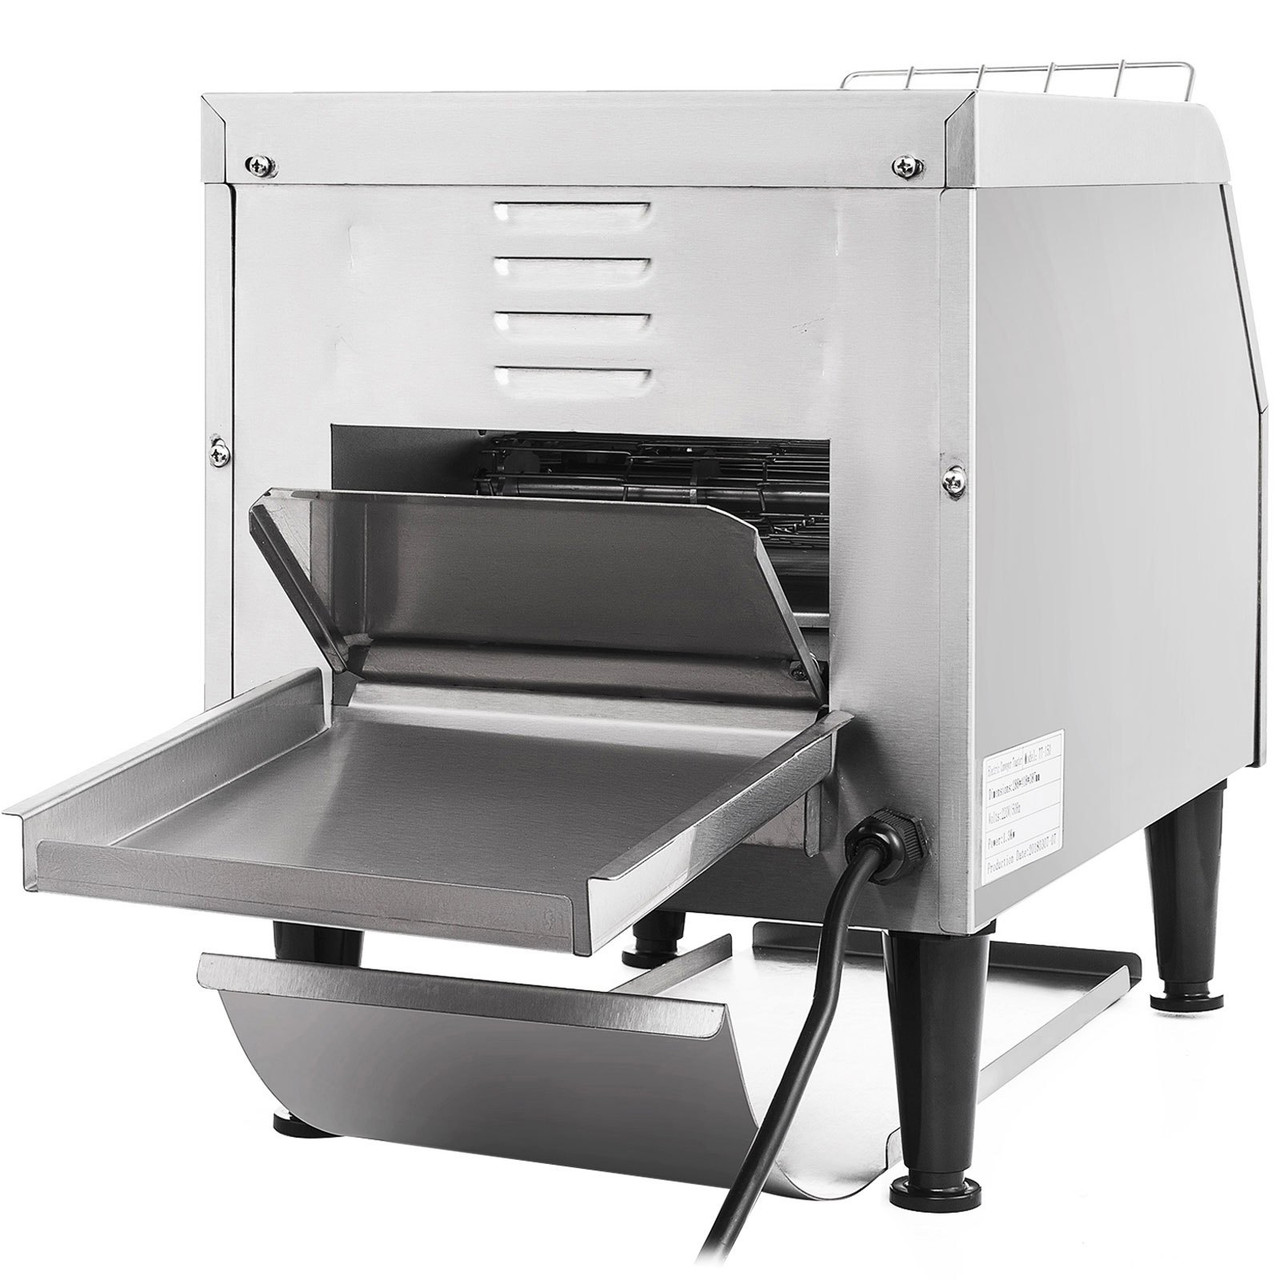 Commercial Conveyor Toaster, 150 Slices / Hour, 1340W Stainless Steel Heavy Duty Industrial Toasters w/ 7 Speed Options, Countertop Electric Restaurant Equipment for Bun Bagel Bread Baked Food